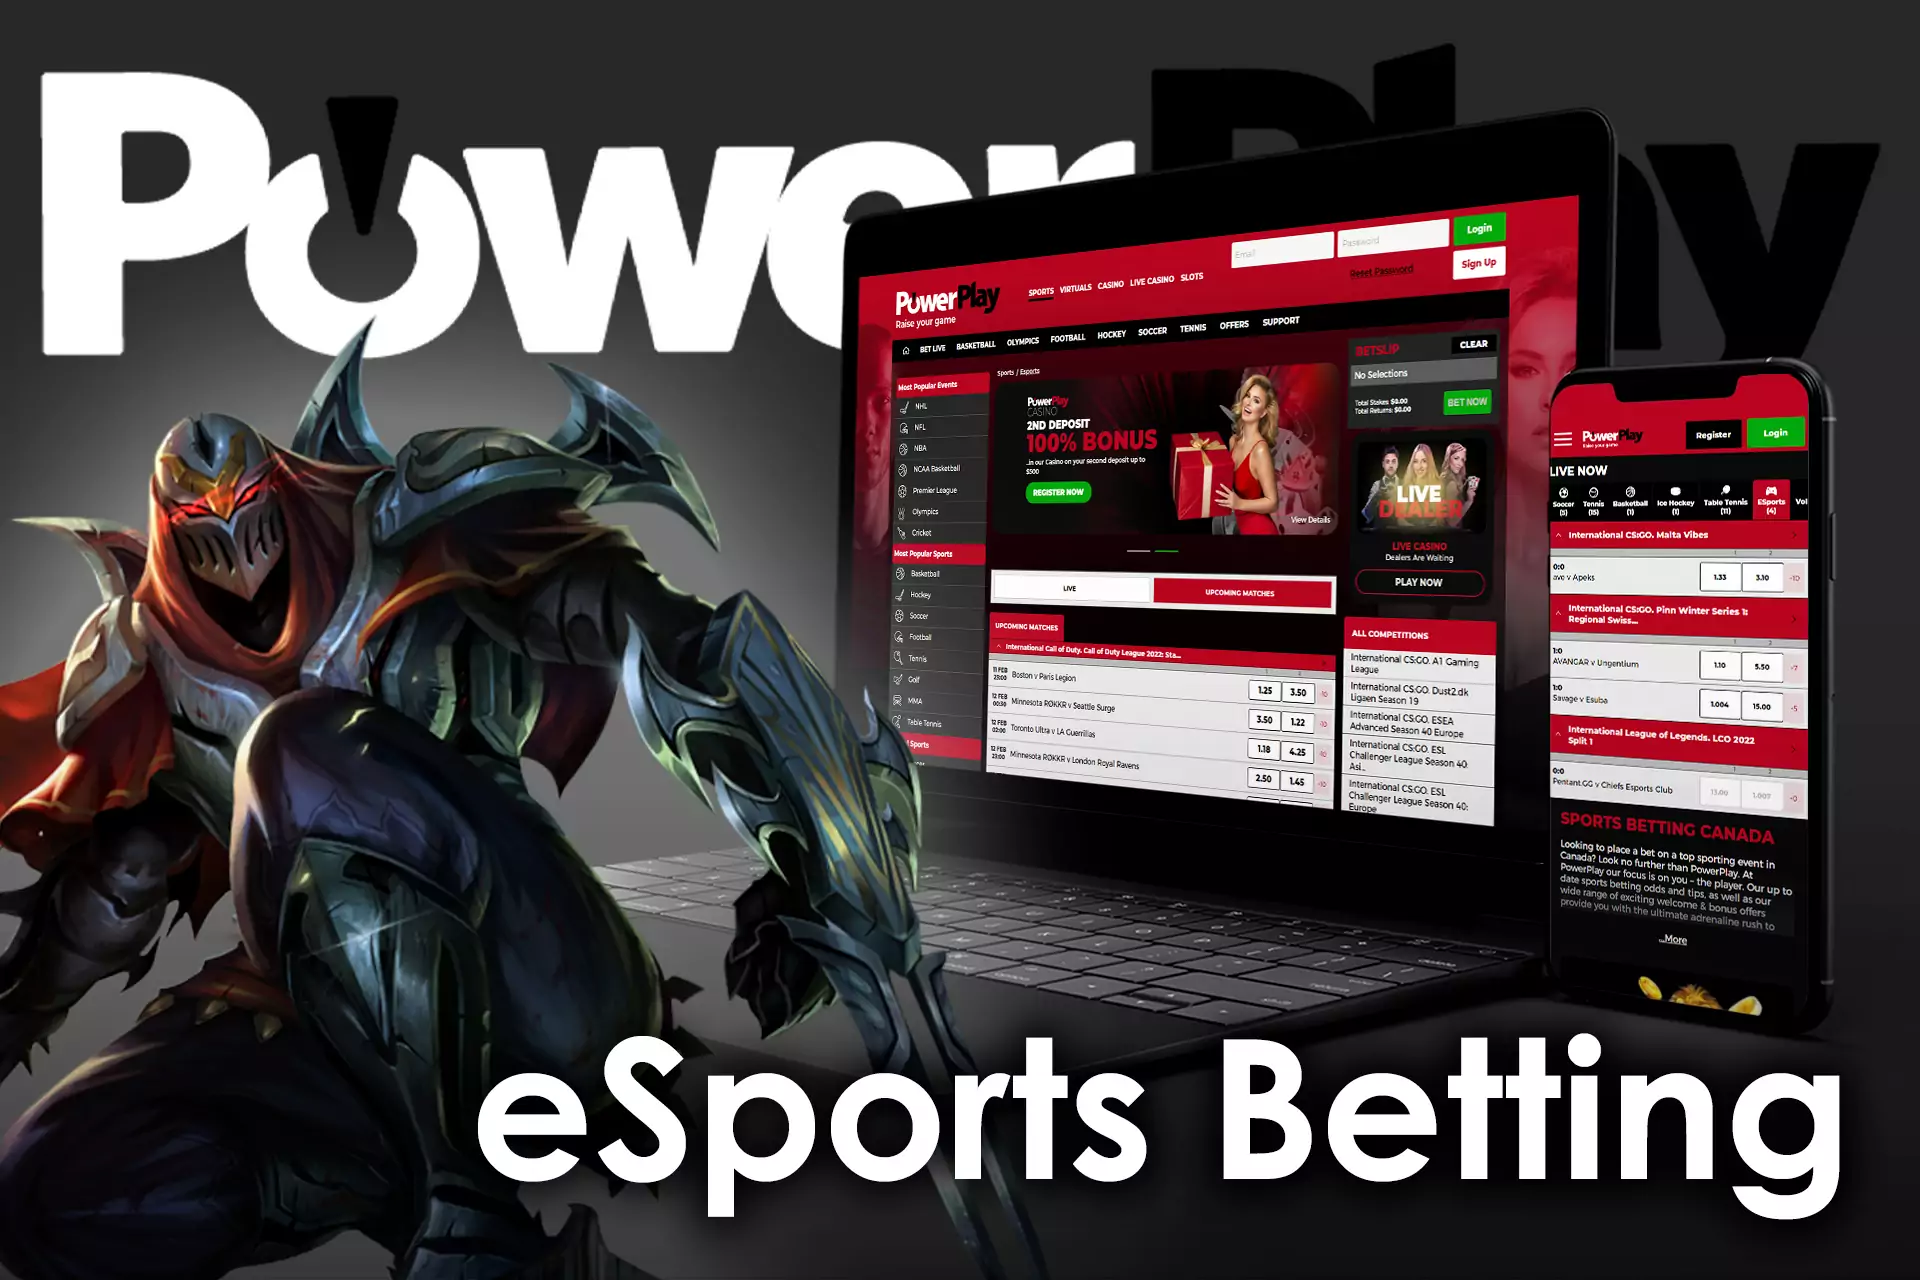 In the eSports section, you can place bets in the cybersports events.